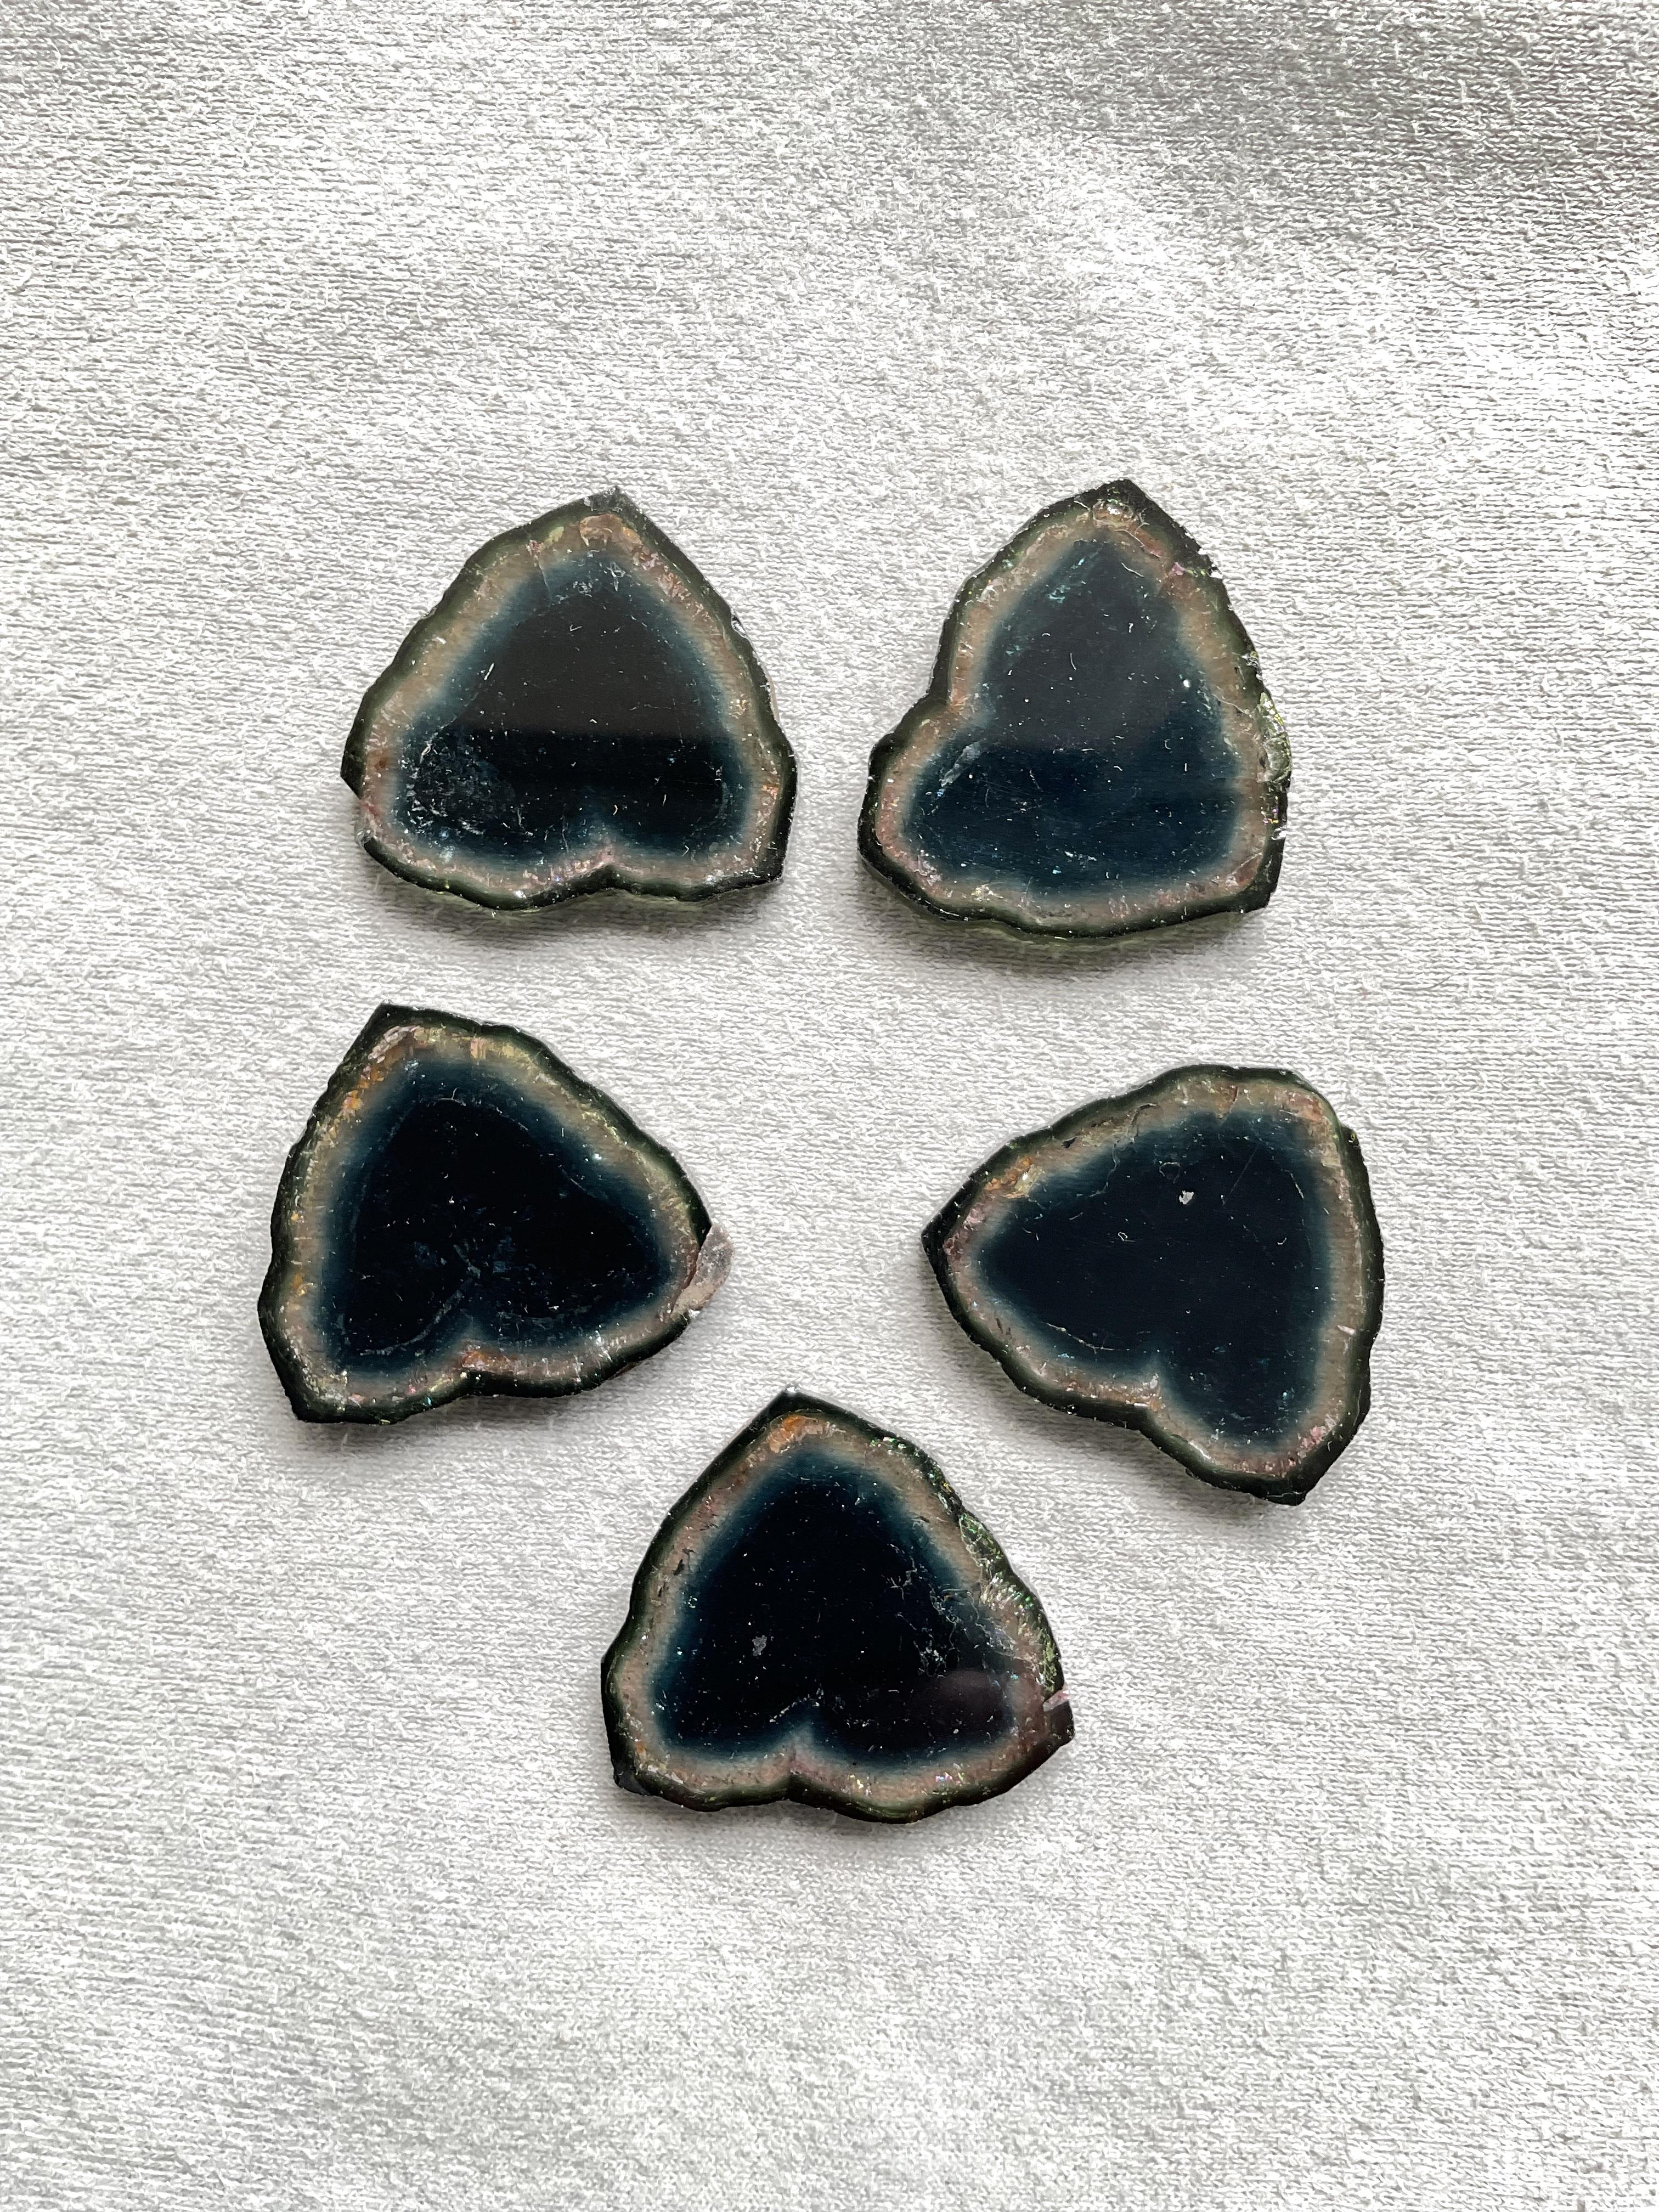 Gemstone - Indicolite Tourmaline
In natural form , polished
Weight - 173.85 Ct
Size -  29x32 mm
Shape - Fancy
Quantity - 5 Pieces